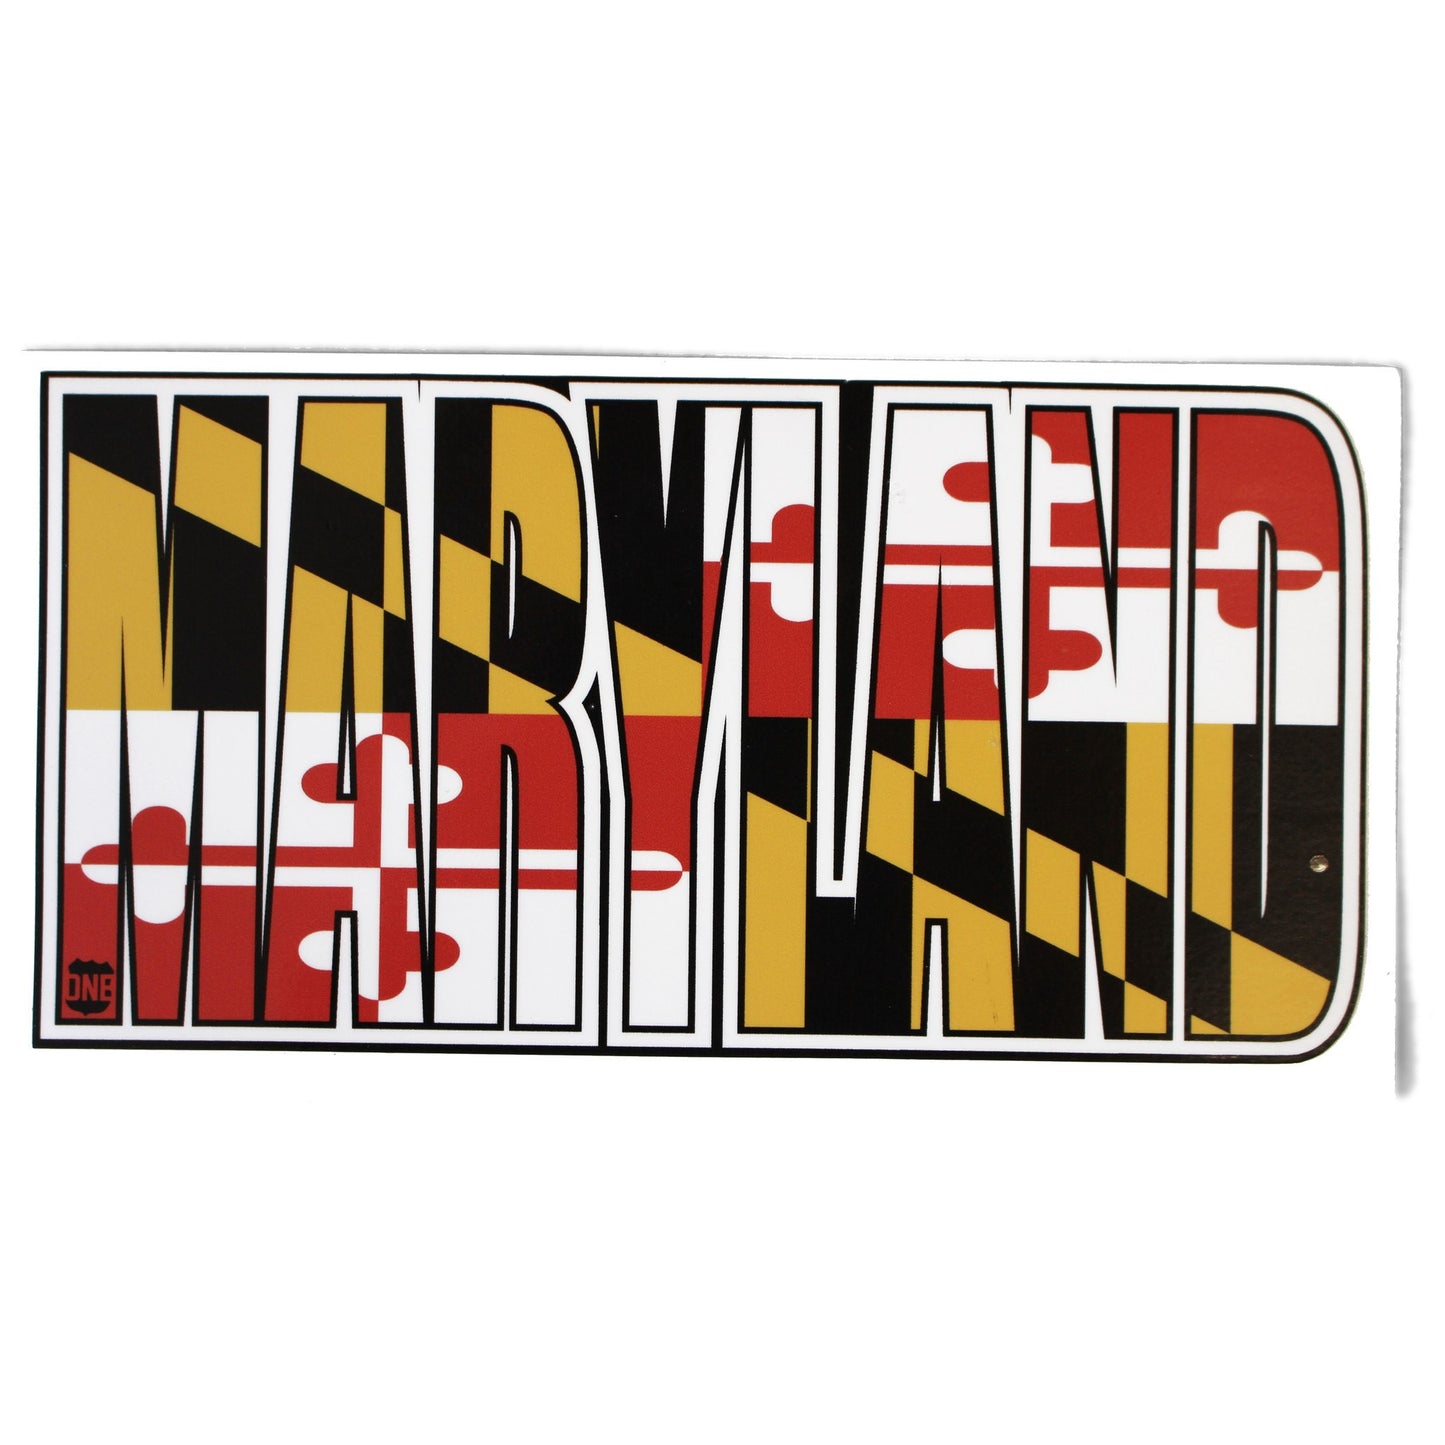 Maryland Flag in Maryland / Sticker - Route One Apparel